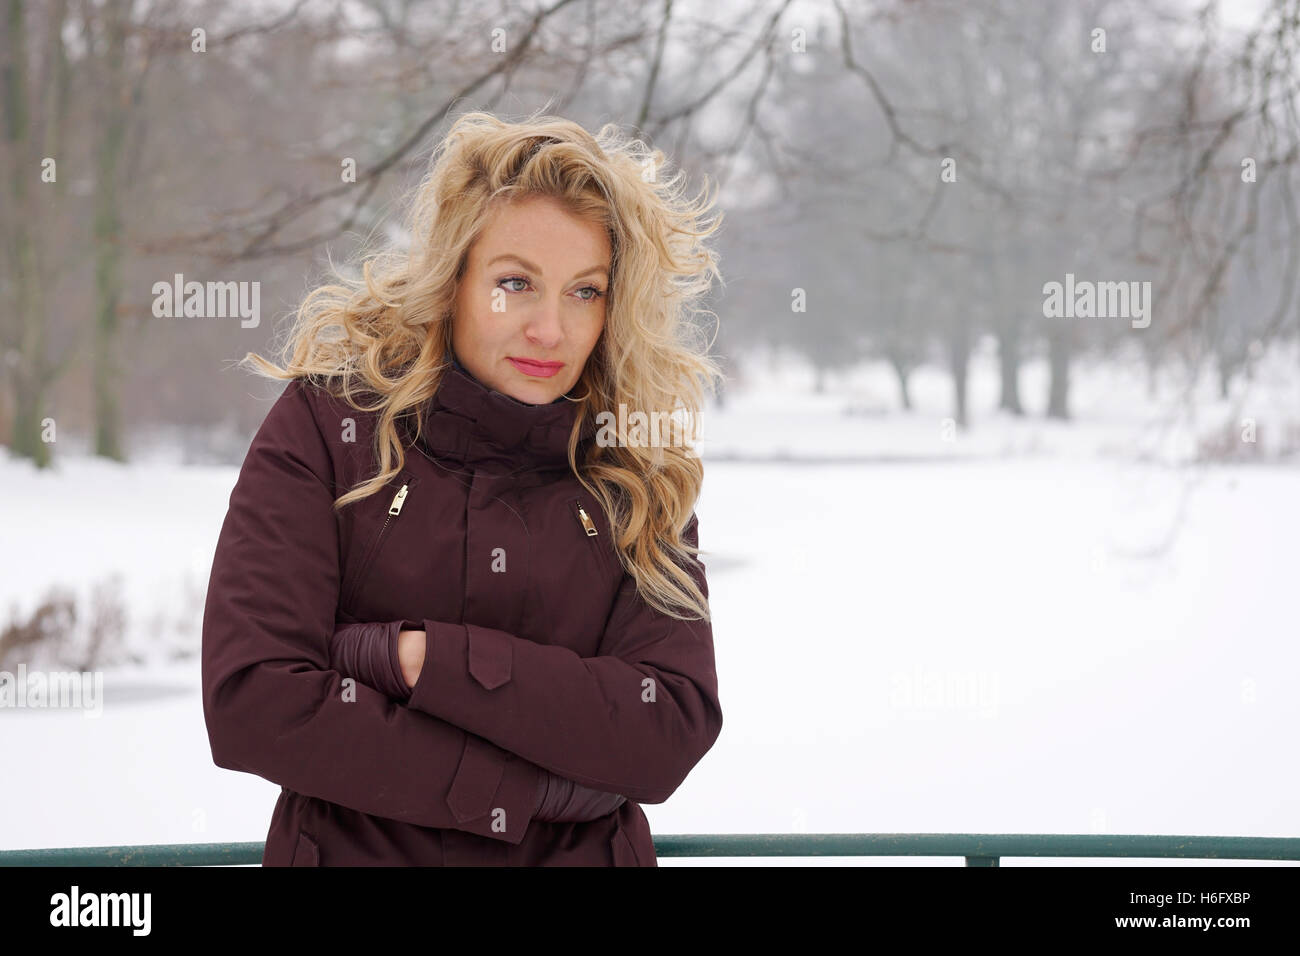 sad woman in snow covered winter landscape Stock Photo